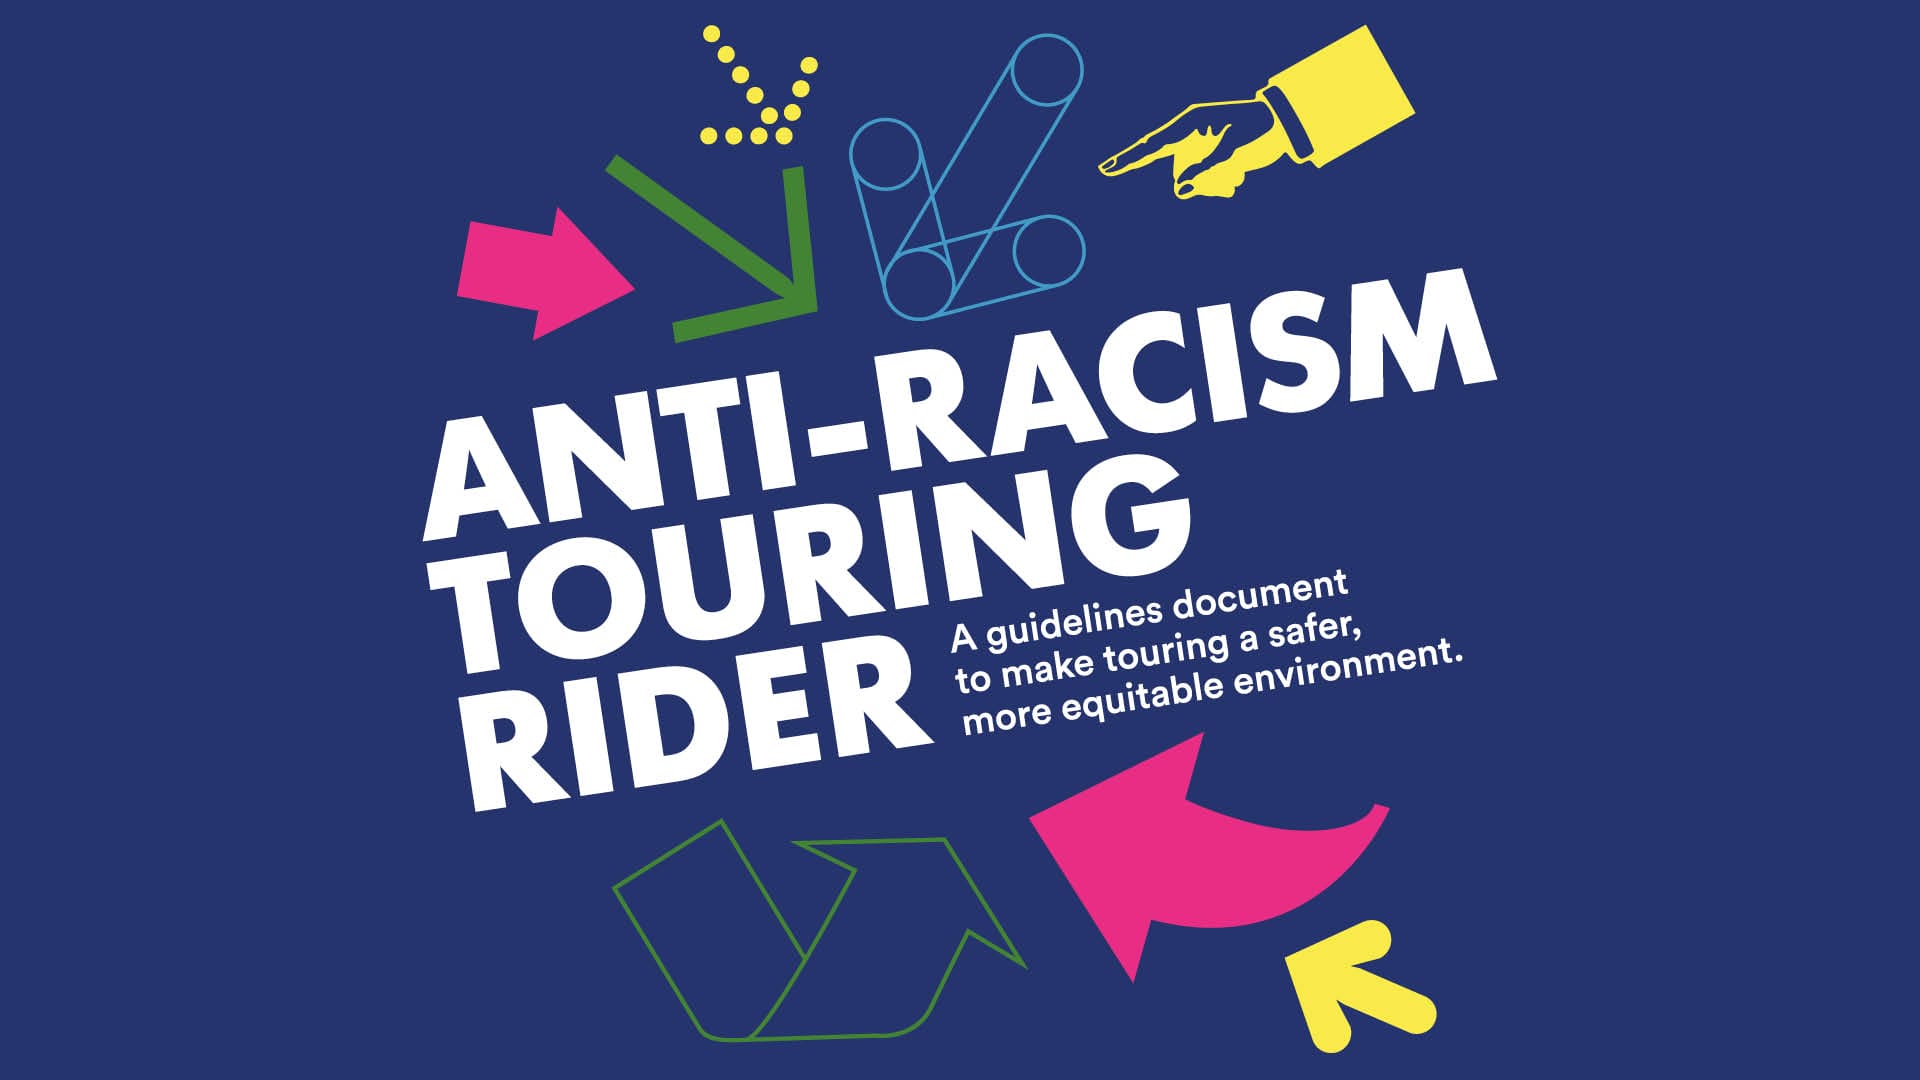 Poster that reads 'Anti-tourism Touring Rider. A guideline document to make touring a safer and more equitable space' in white text on a blue background. There are pink, yellow, green, and blue arrows of different styles pointing inwards towards the text.